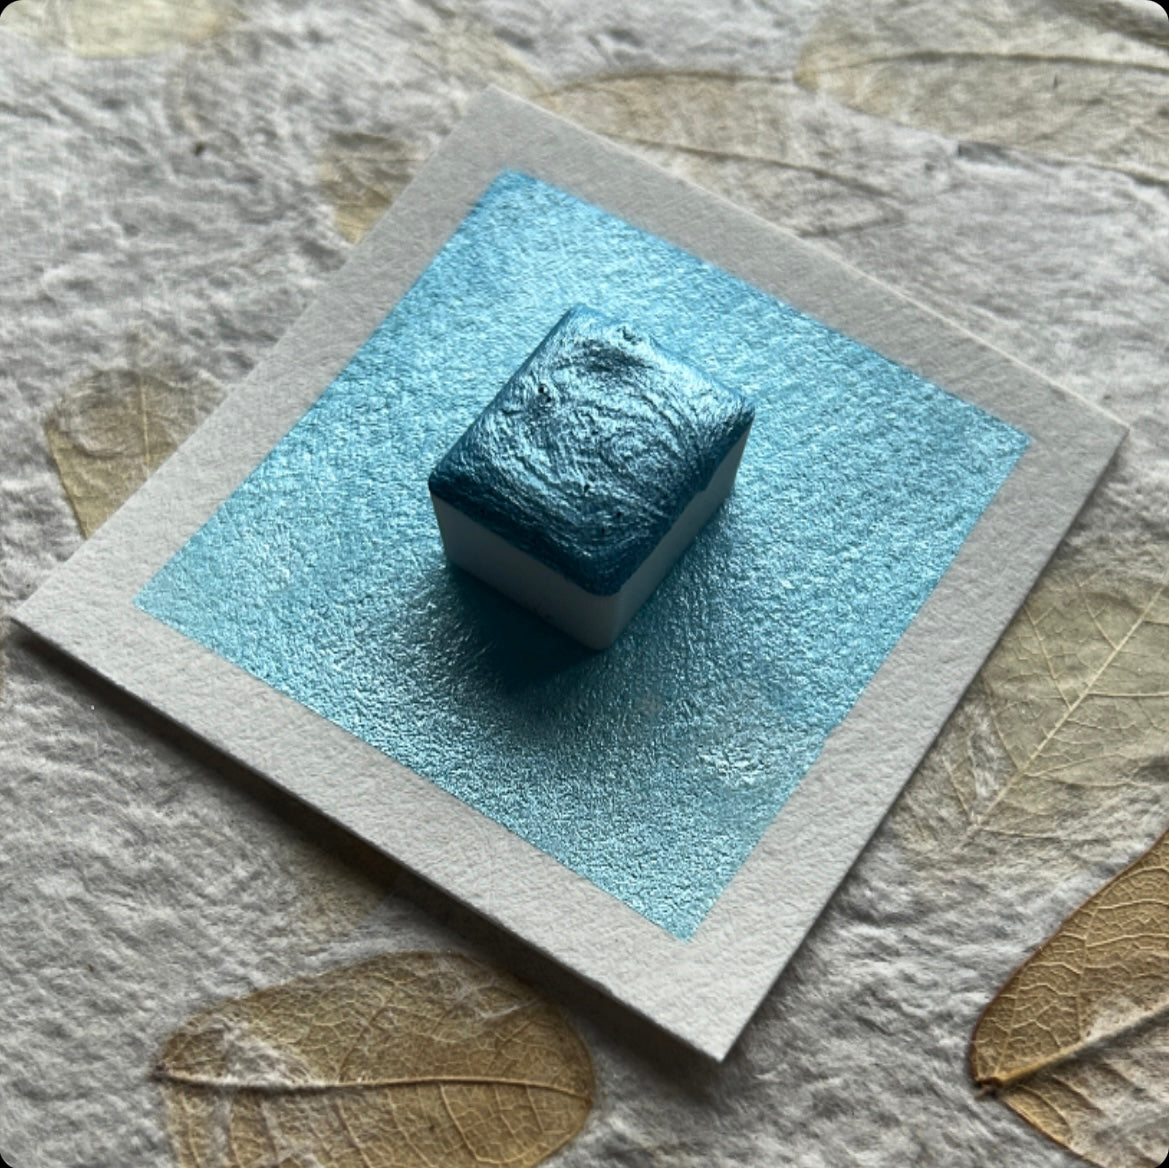 NEW VERSION - "Icy Blue" - Pastel Blue Shimmer